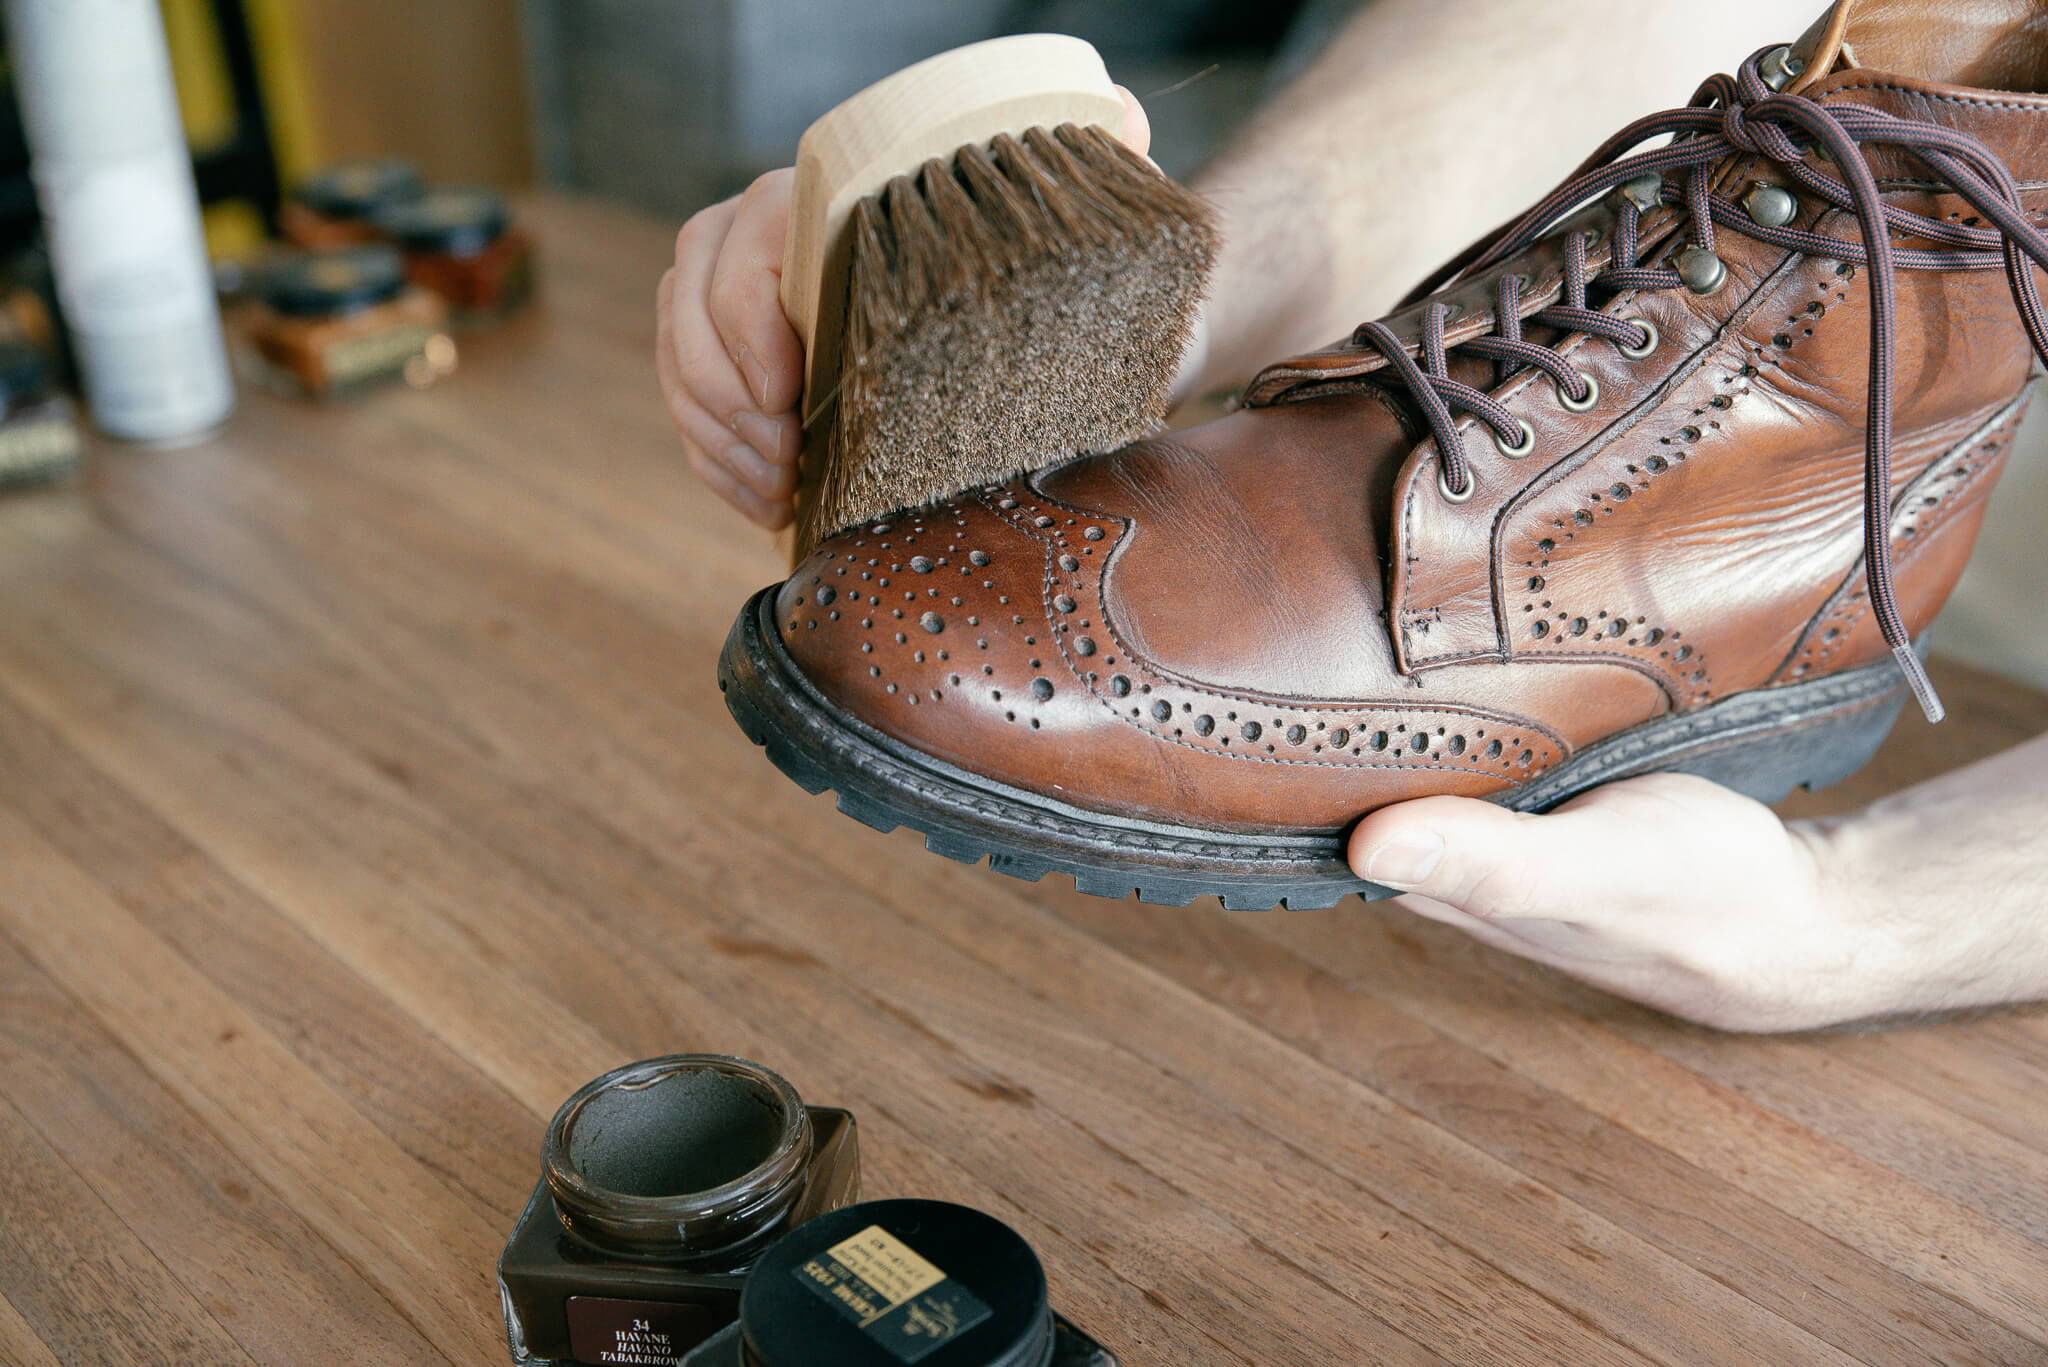 Leather Shoe Laces Are a Must-Have for Footwear Collection